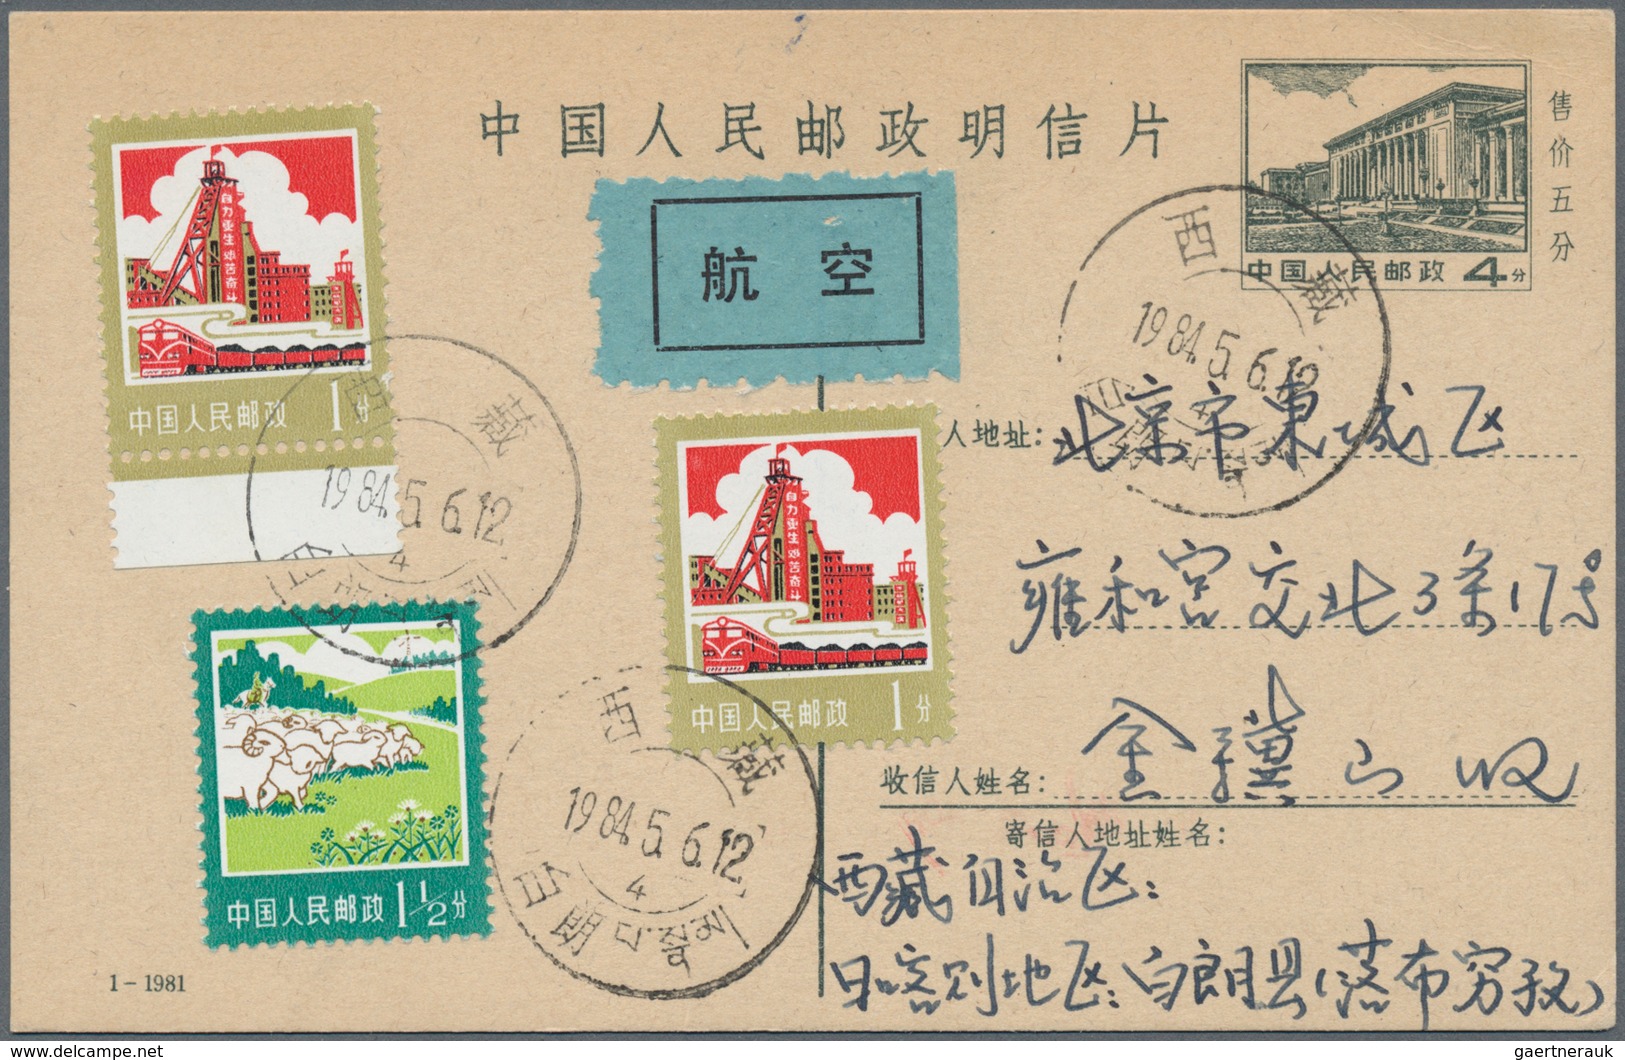 China - Volksrepublik - Ganzsachen: 1977/81, Used In Tibet, To Peking: Card 2 F. Uprated 2 F. (7-197 - Cartes Postales